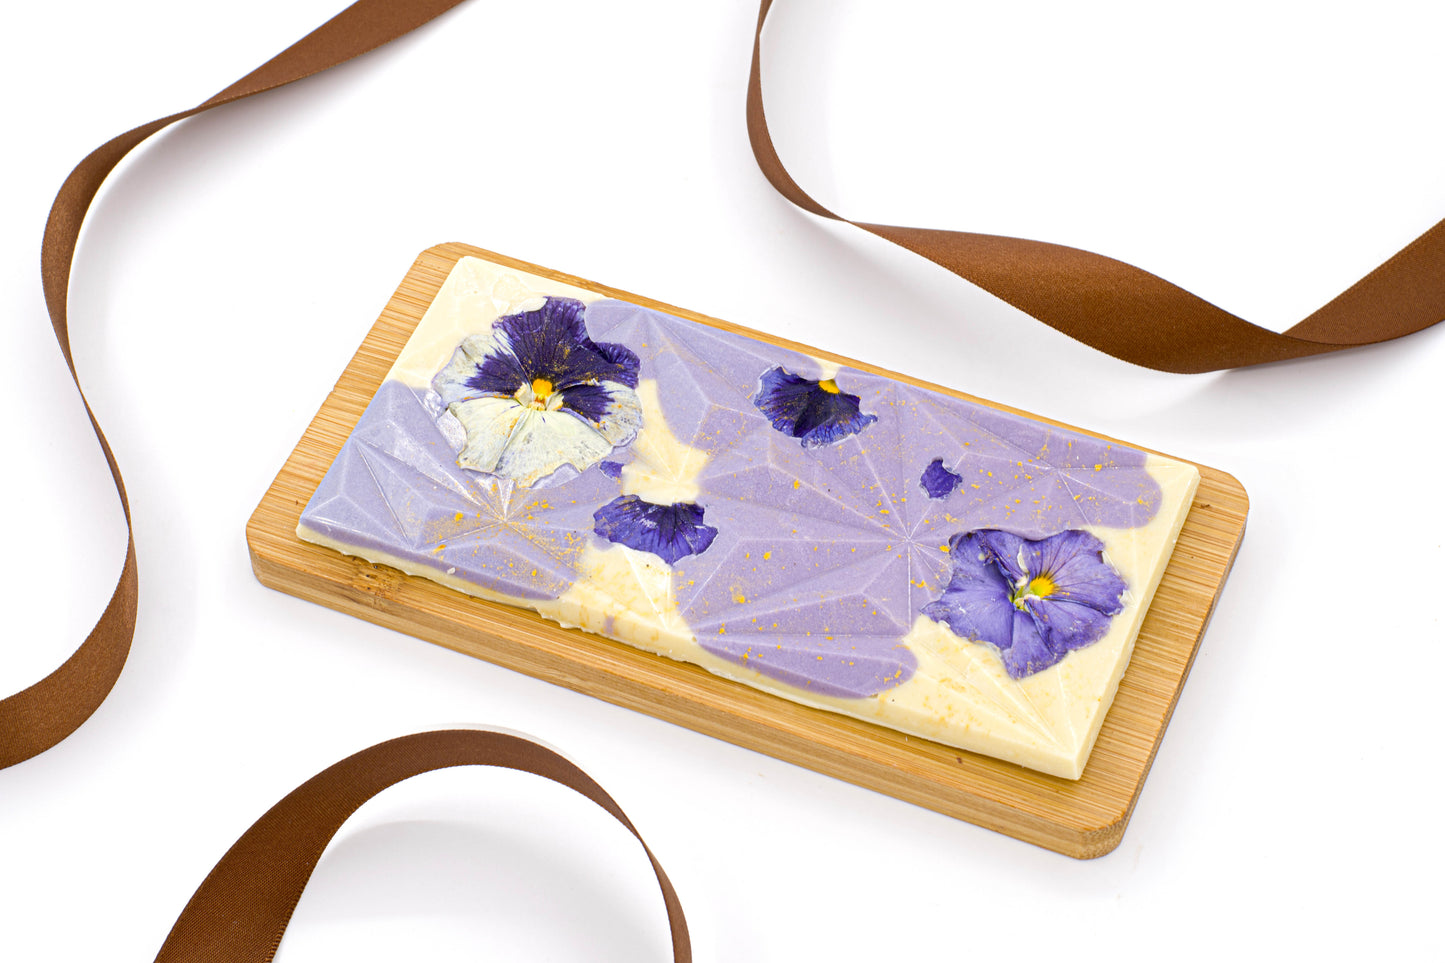 White Chocolate bars with Flowers